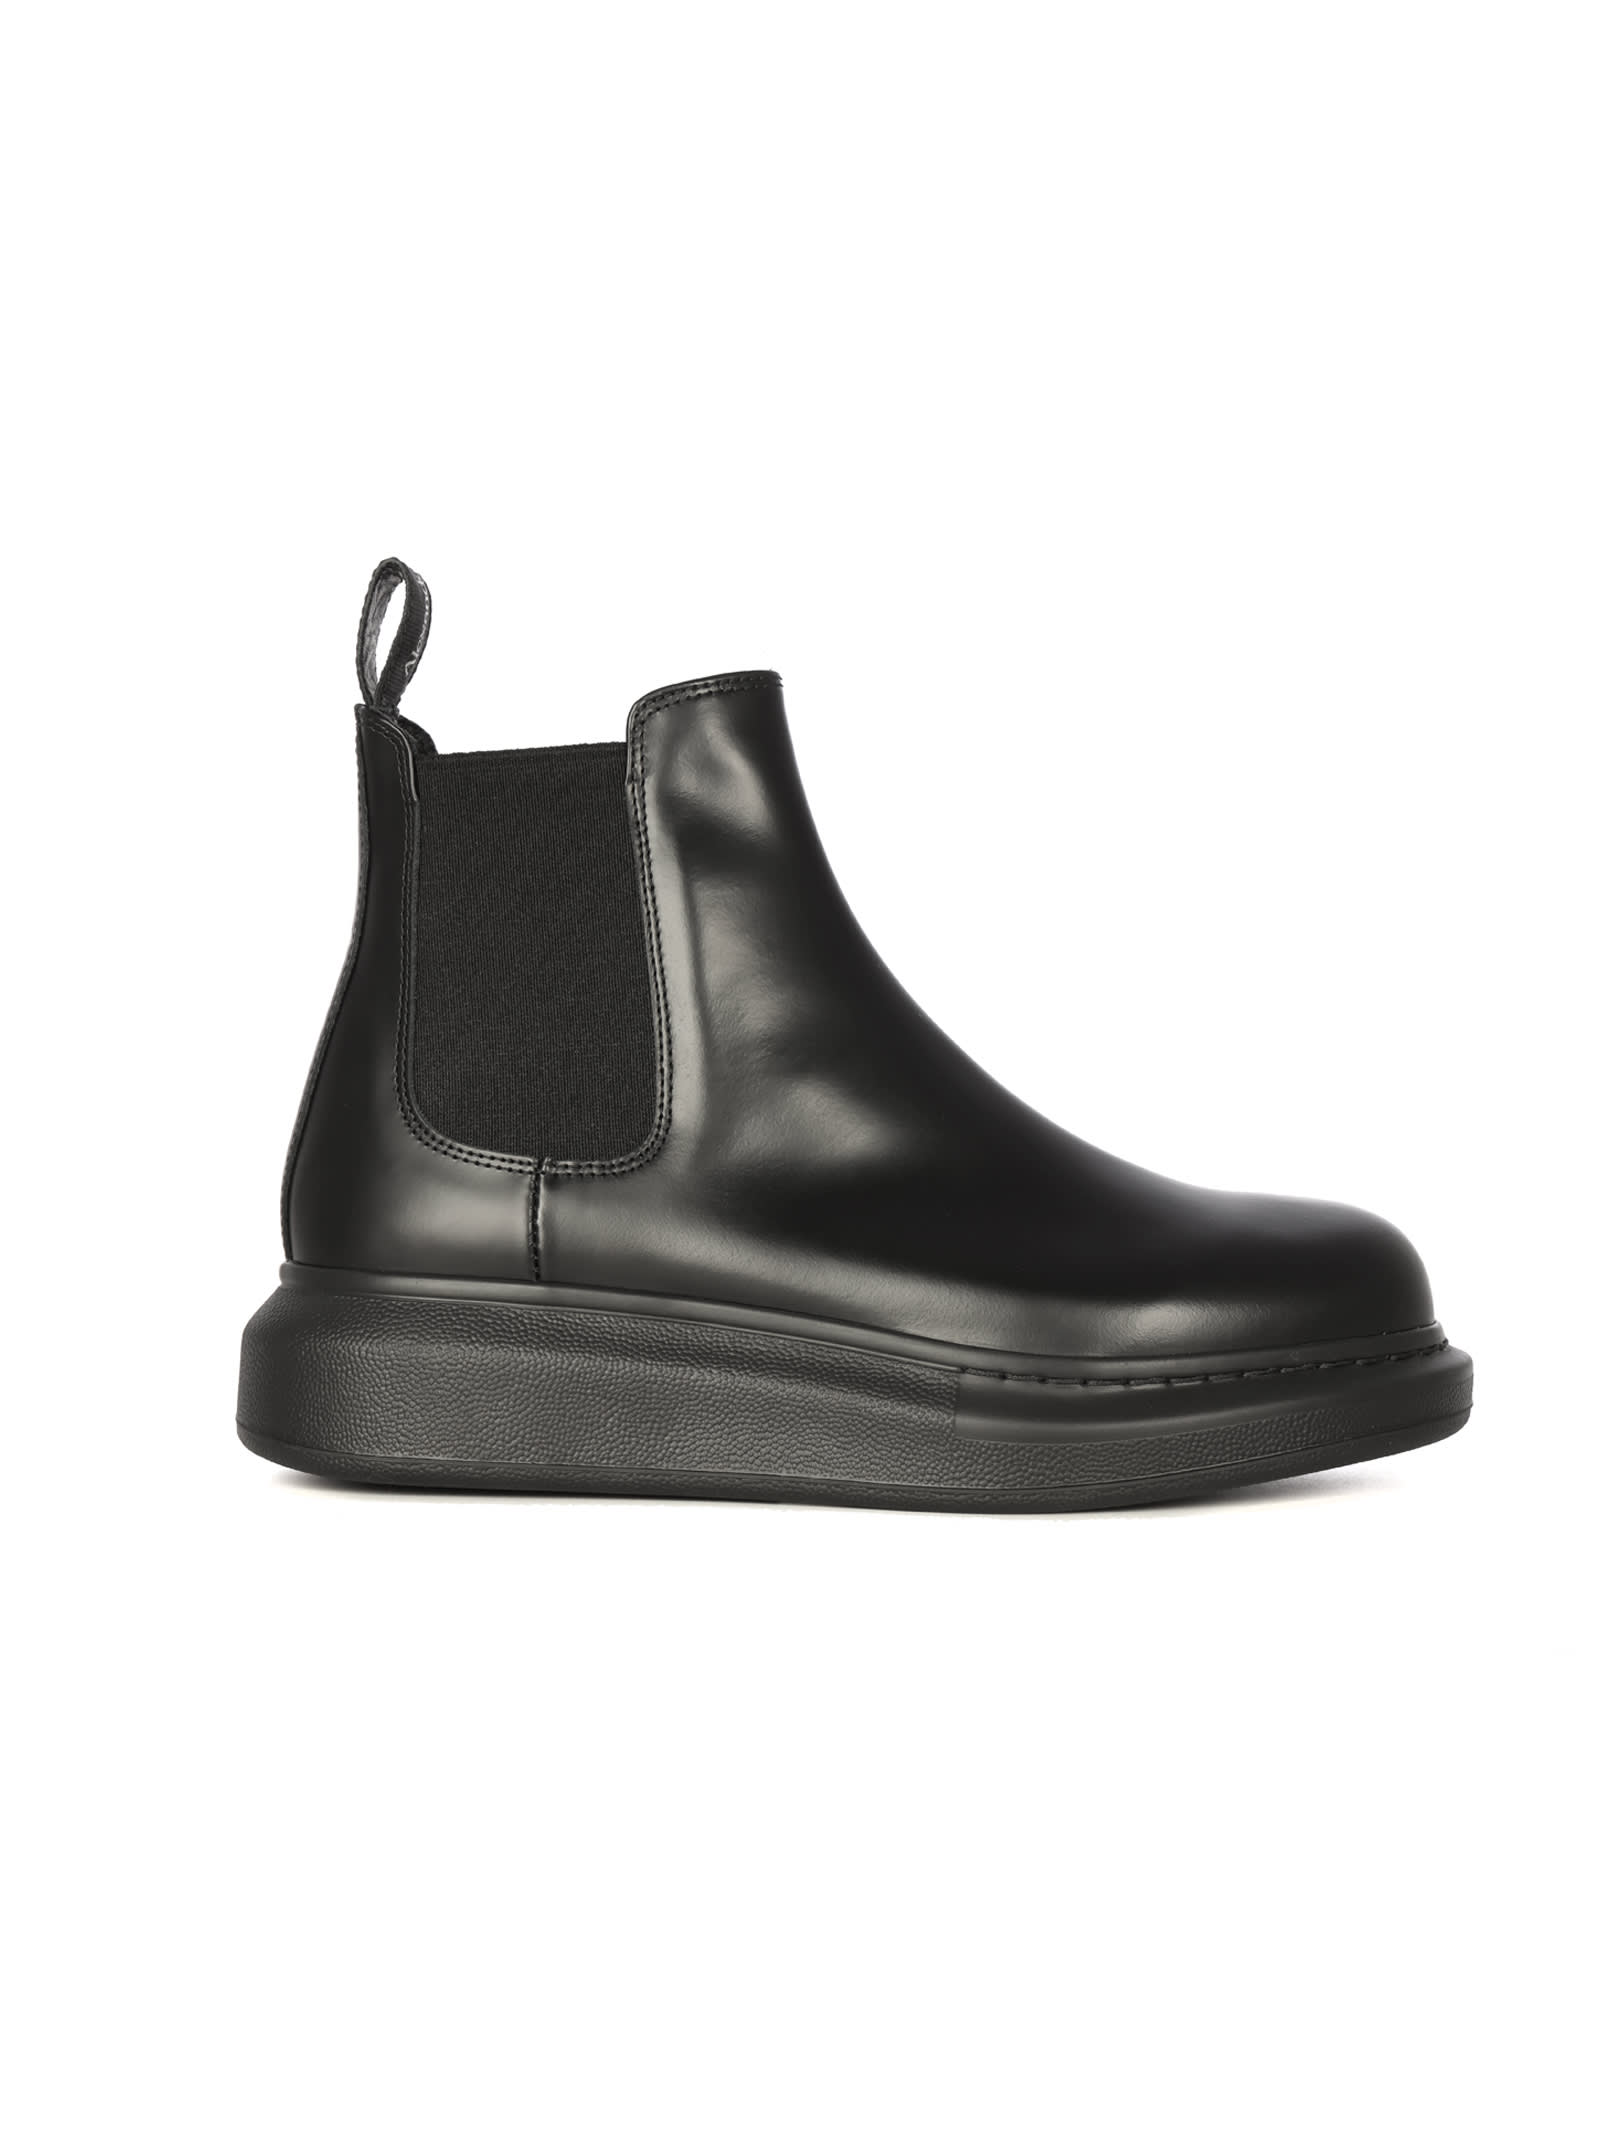 Buy Alexander McQueen Lateral Elastic Leather Upper And Sole Chelsea Boots online, shop Alexander McQueen shoes with free shipping